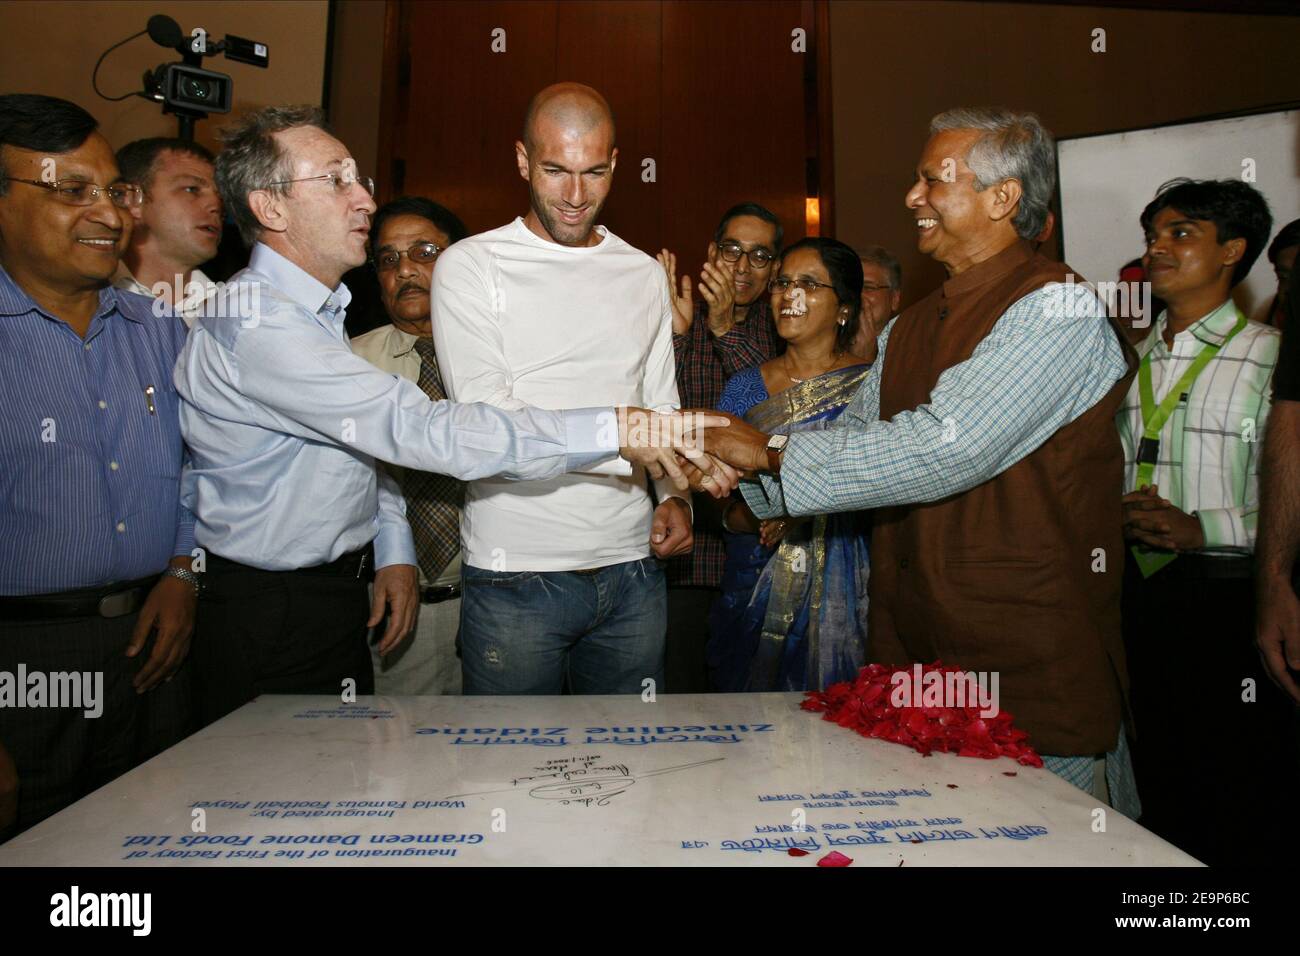 French football player Zinedine Zidane signs his autograph with Danone CEO Franck Riboud and Bangladeshi Nobel Peace Prize winner Muhammad Yunus on a stone as he officially opens a yogurt factory project run by French food giant Danone and Grameen Bank at a ceremony in Dhaka, Bangladesh on November 8, 2006. The project set up in the northern Bangladesh town of Bogra will produce nutritious food products for the people in the low income area. Photo by Patrick Durand/Cameleon/ABACAPRESS.COM Stock Photo